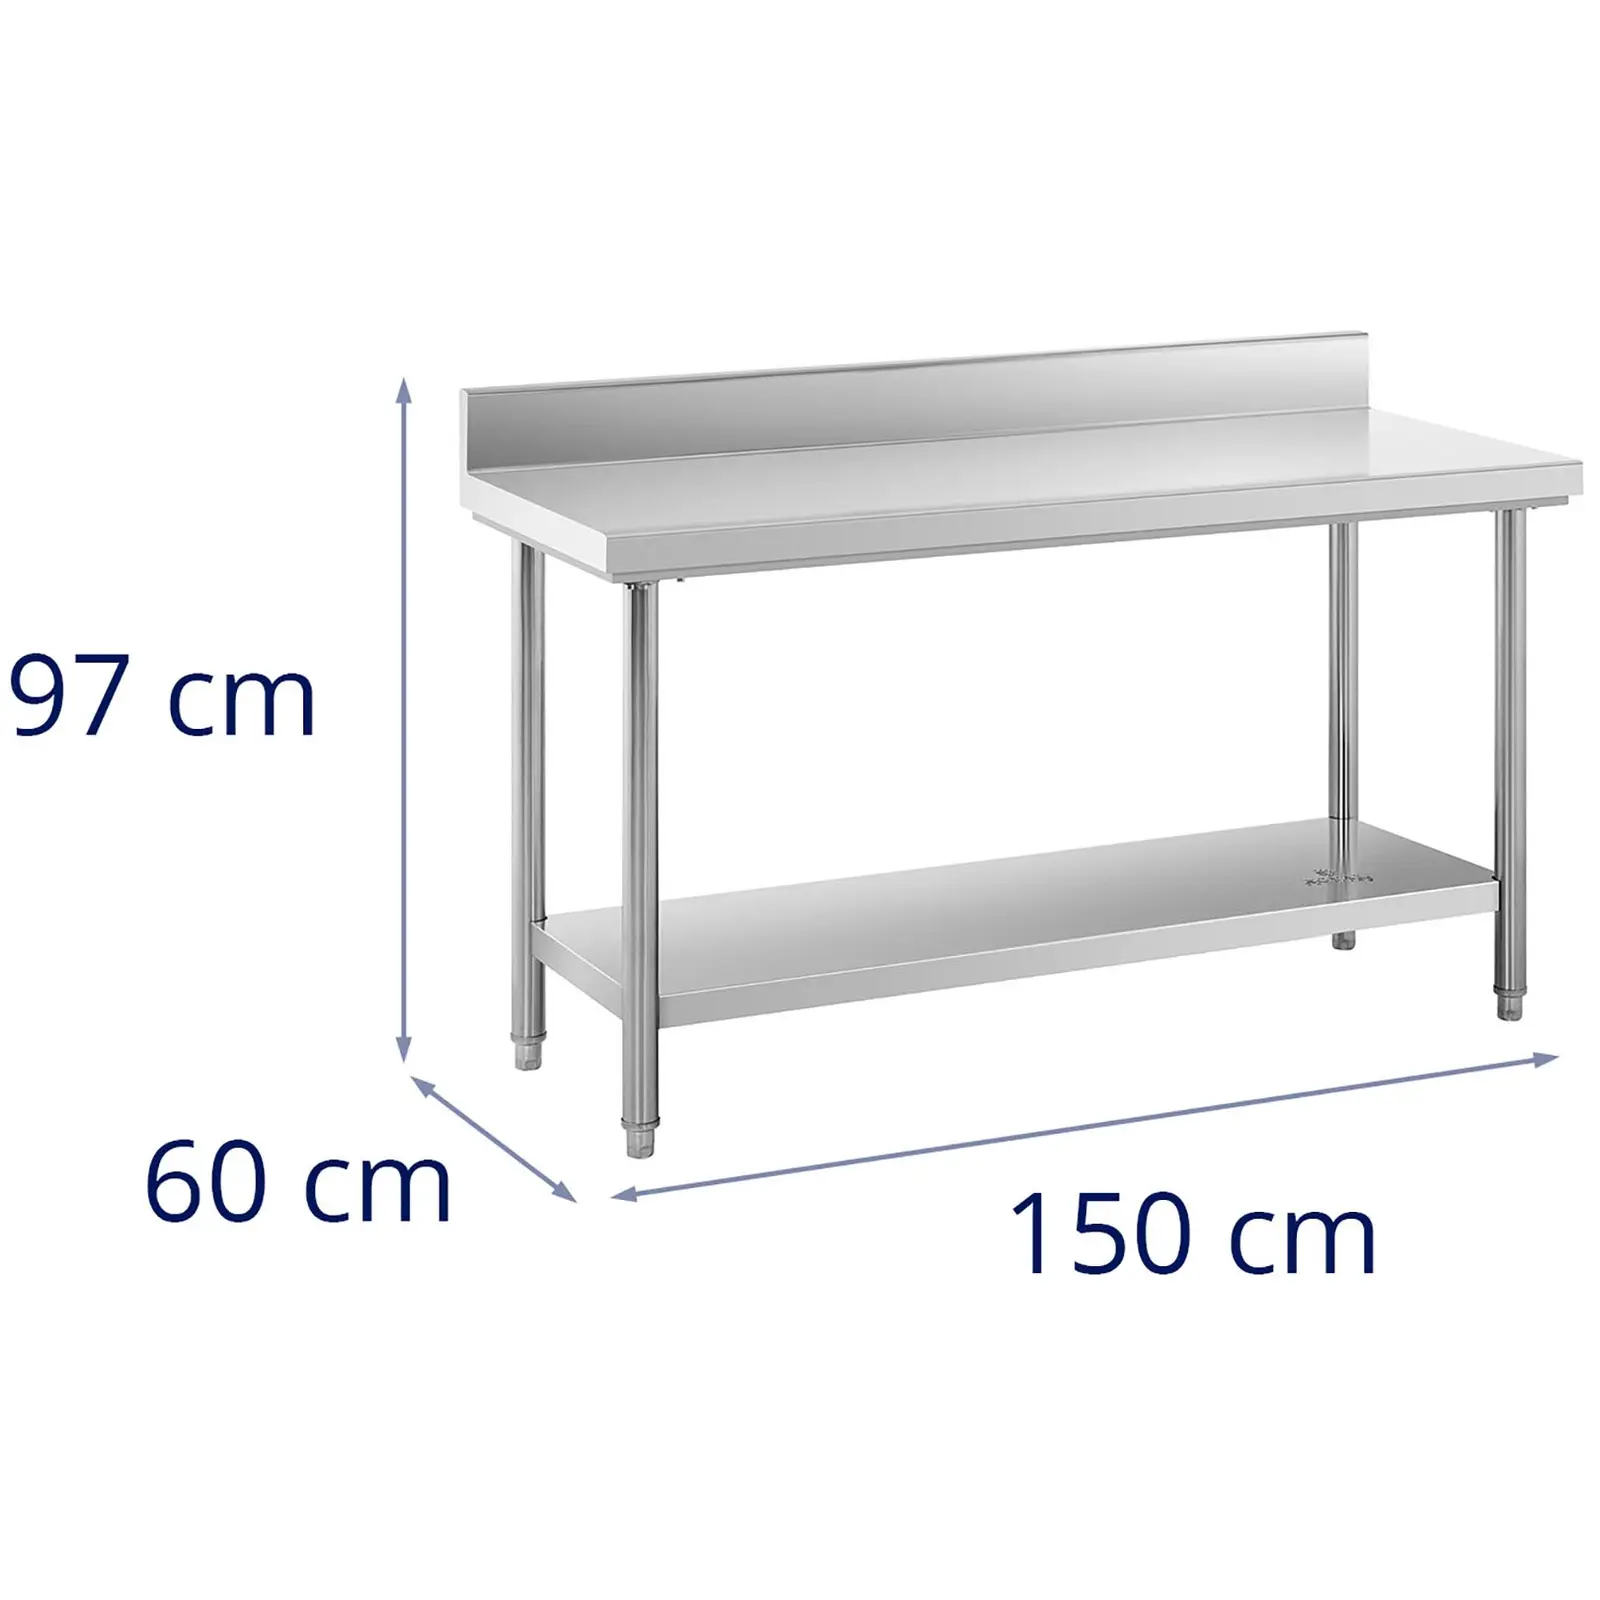 Stainless Steel Work Table - 150 x 60 cm - upstand - 159 kg capacity - Royal Catering